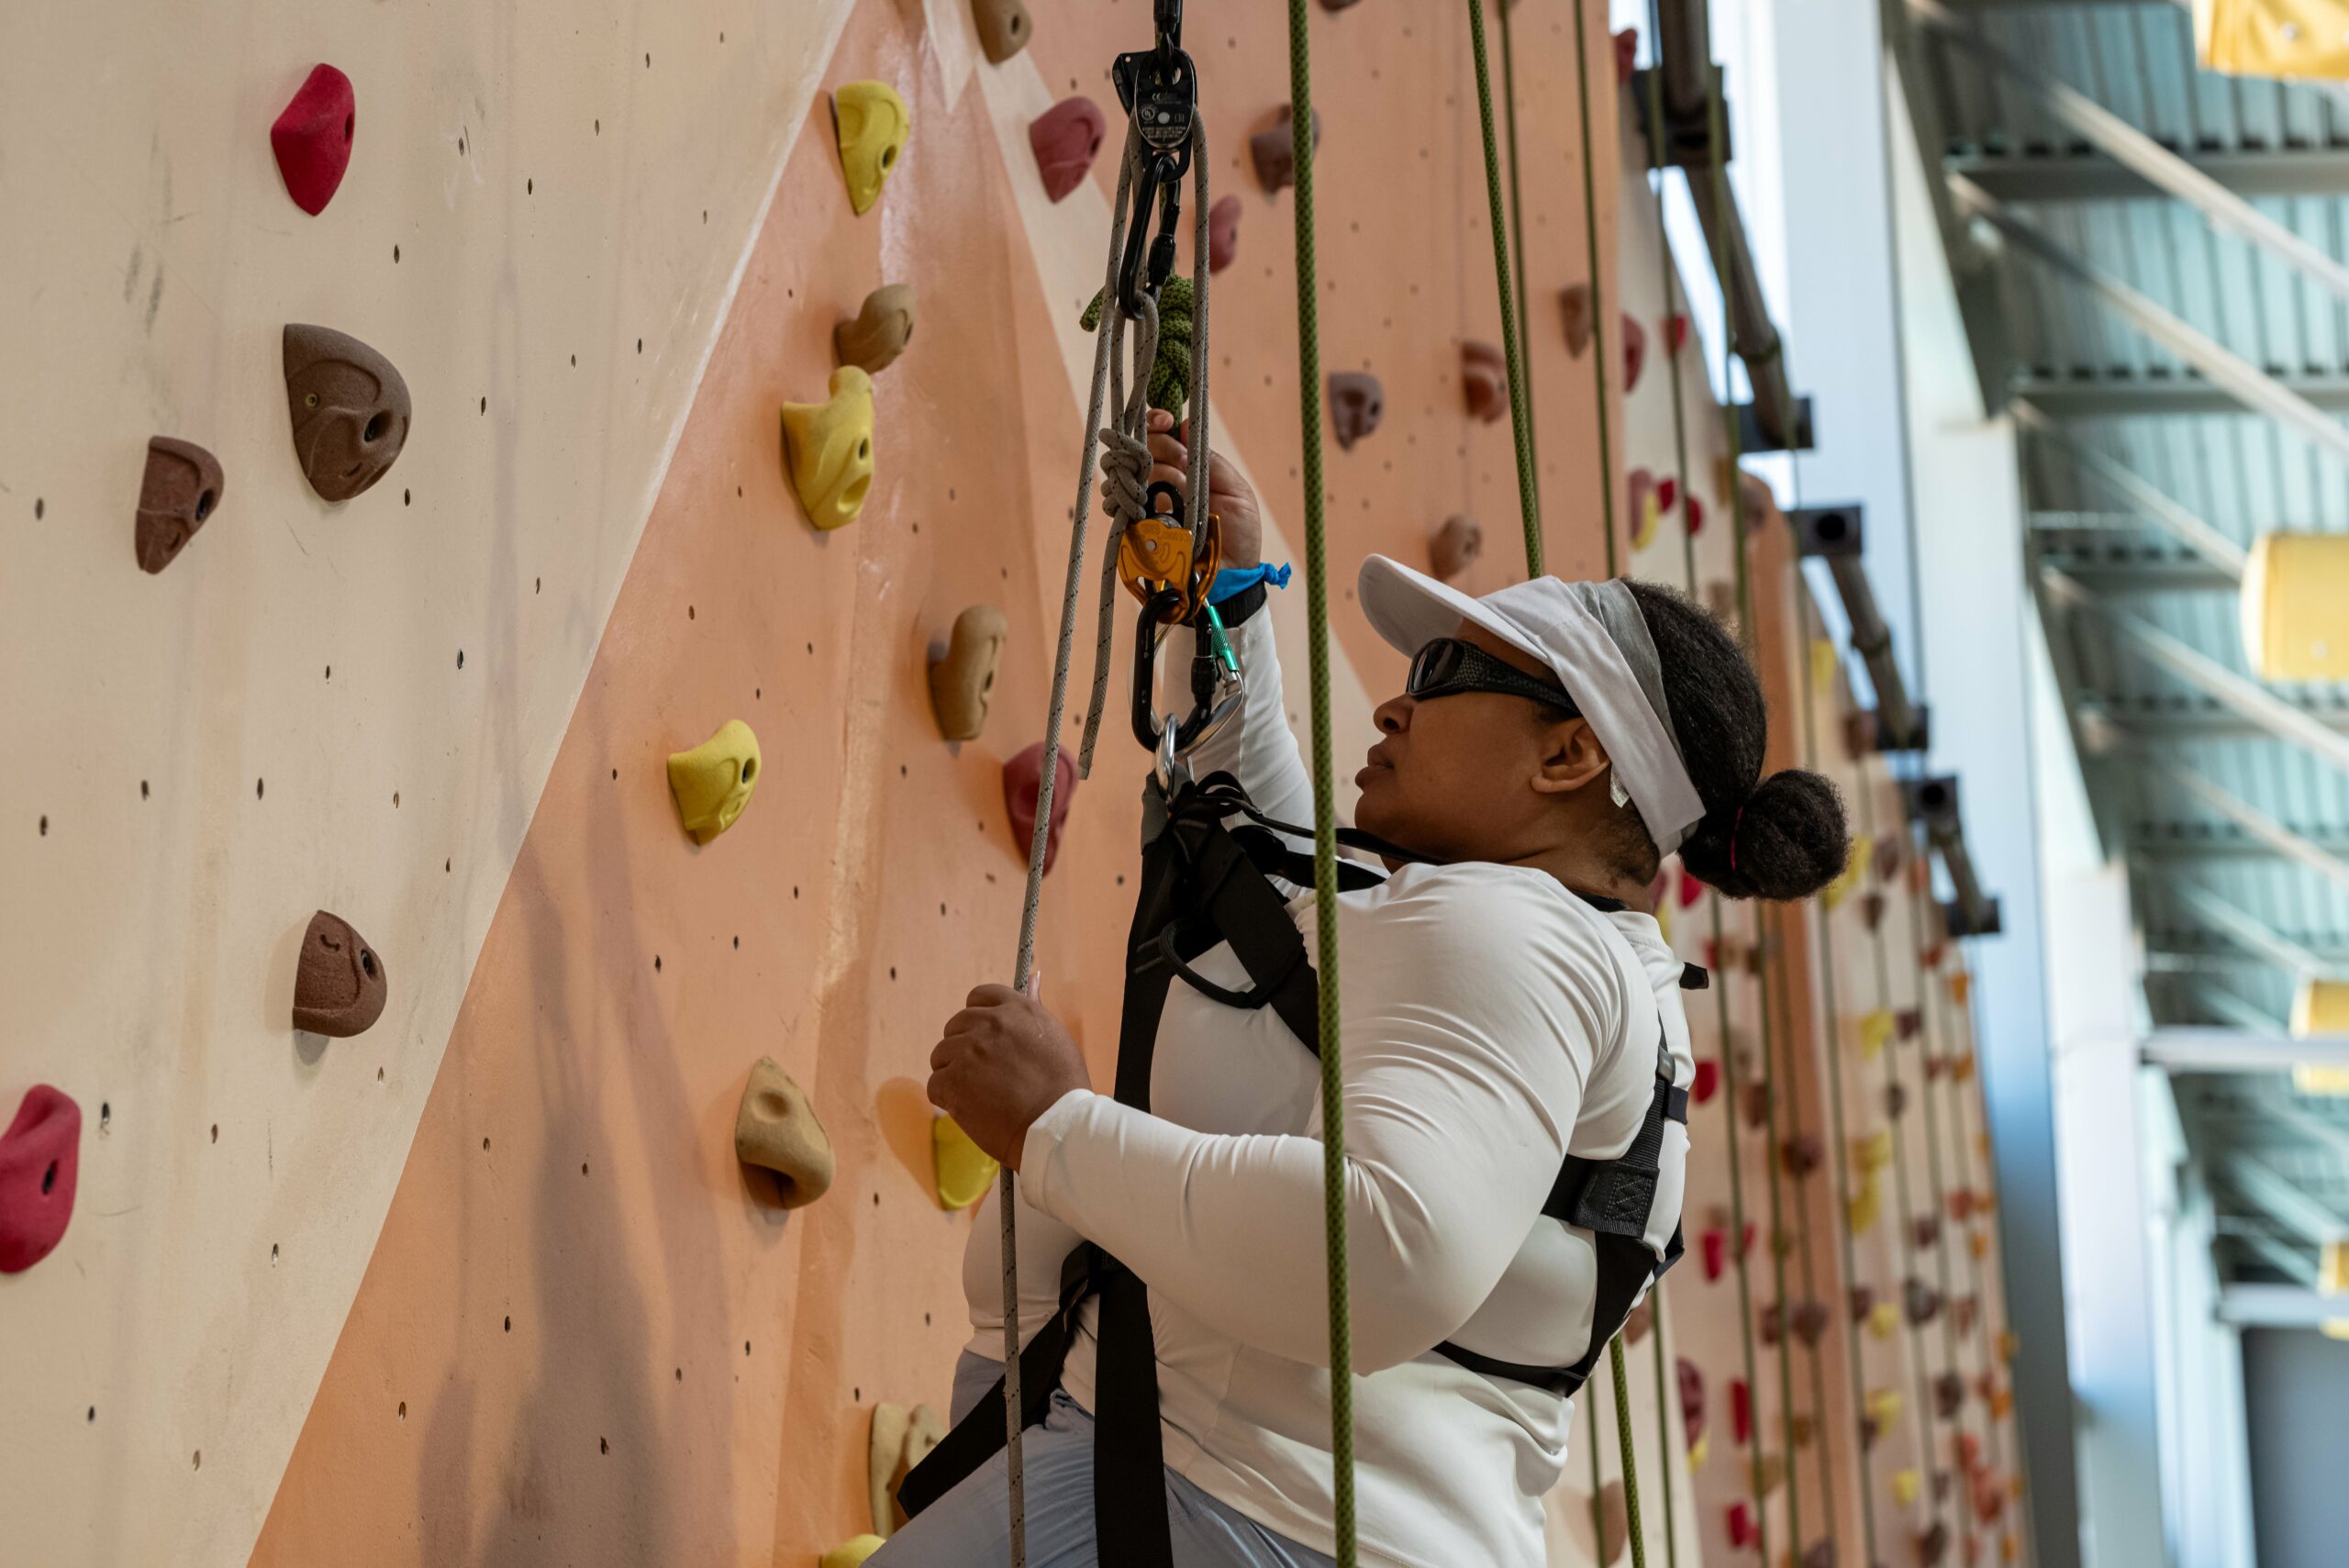 Woman in harness on top rope reaching up climbing wall